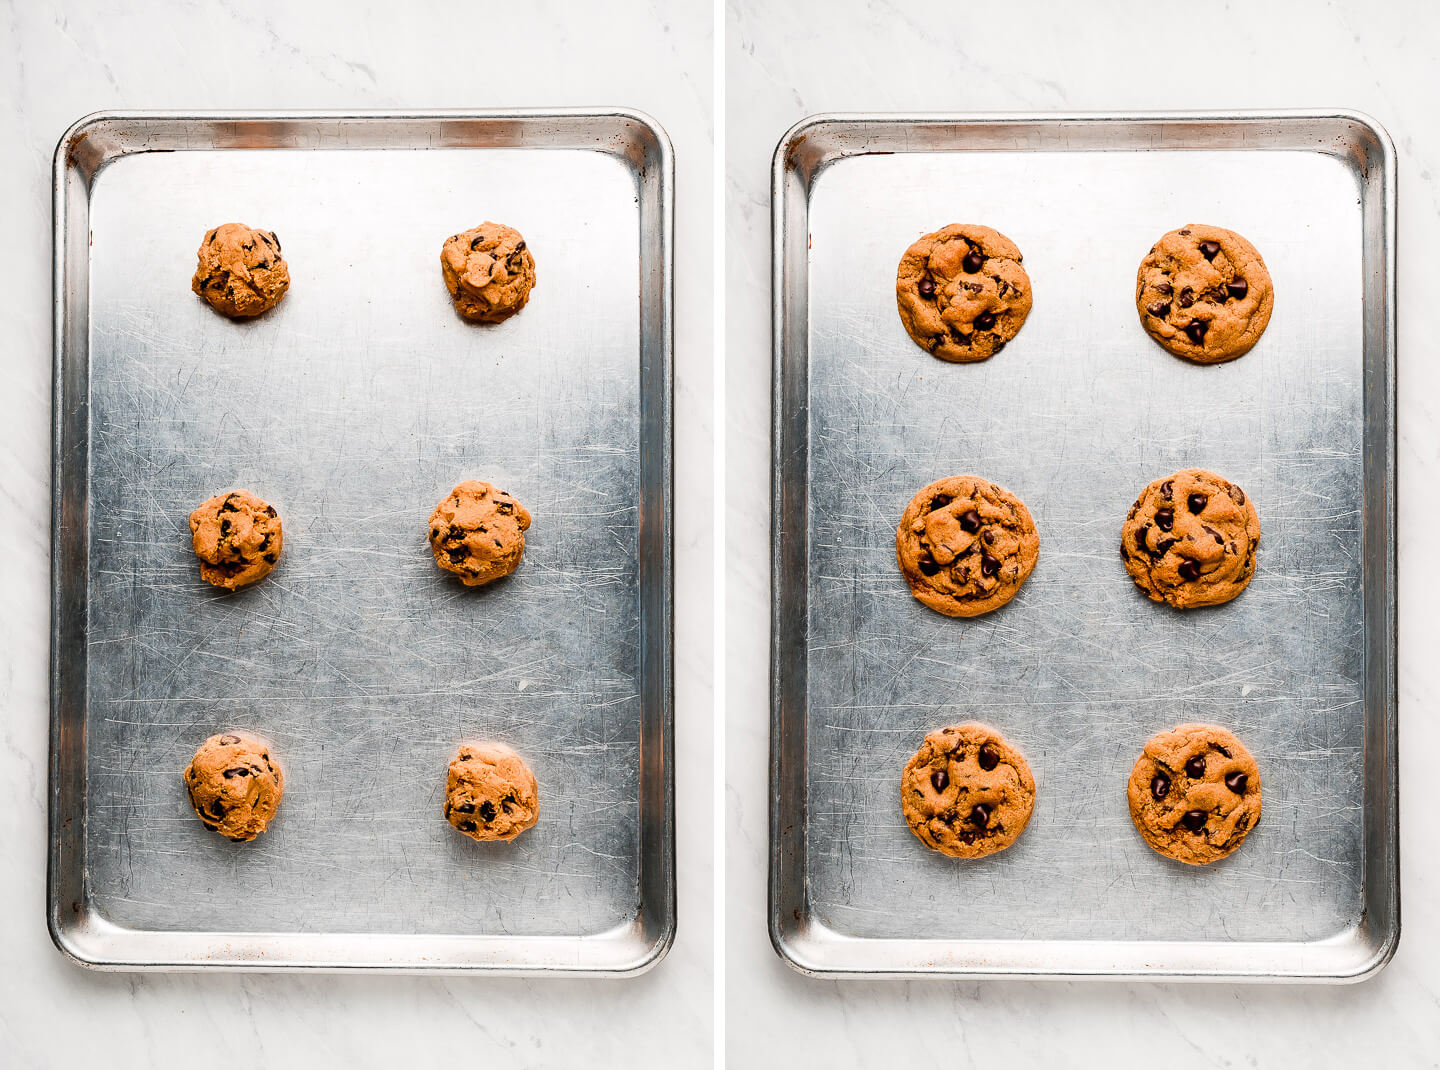 Diptych- cookie dough balls on a baking sheet; baked cookies.